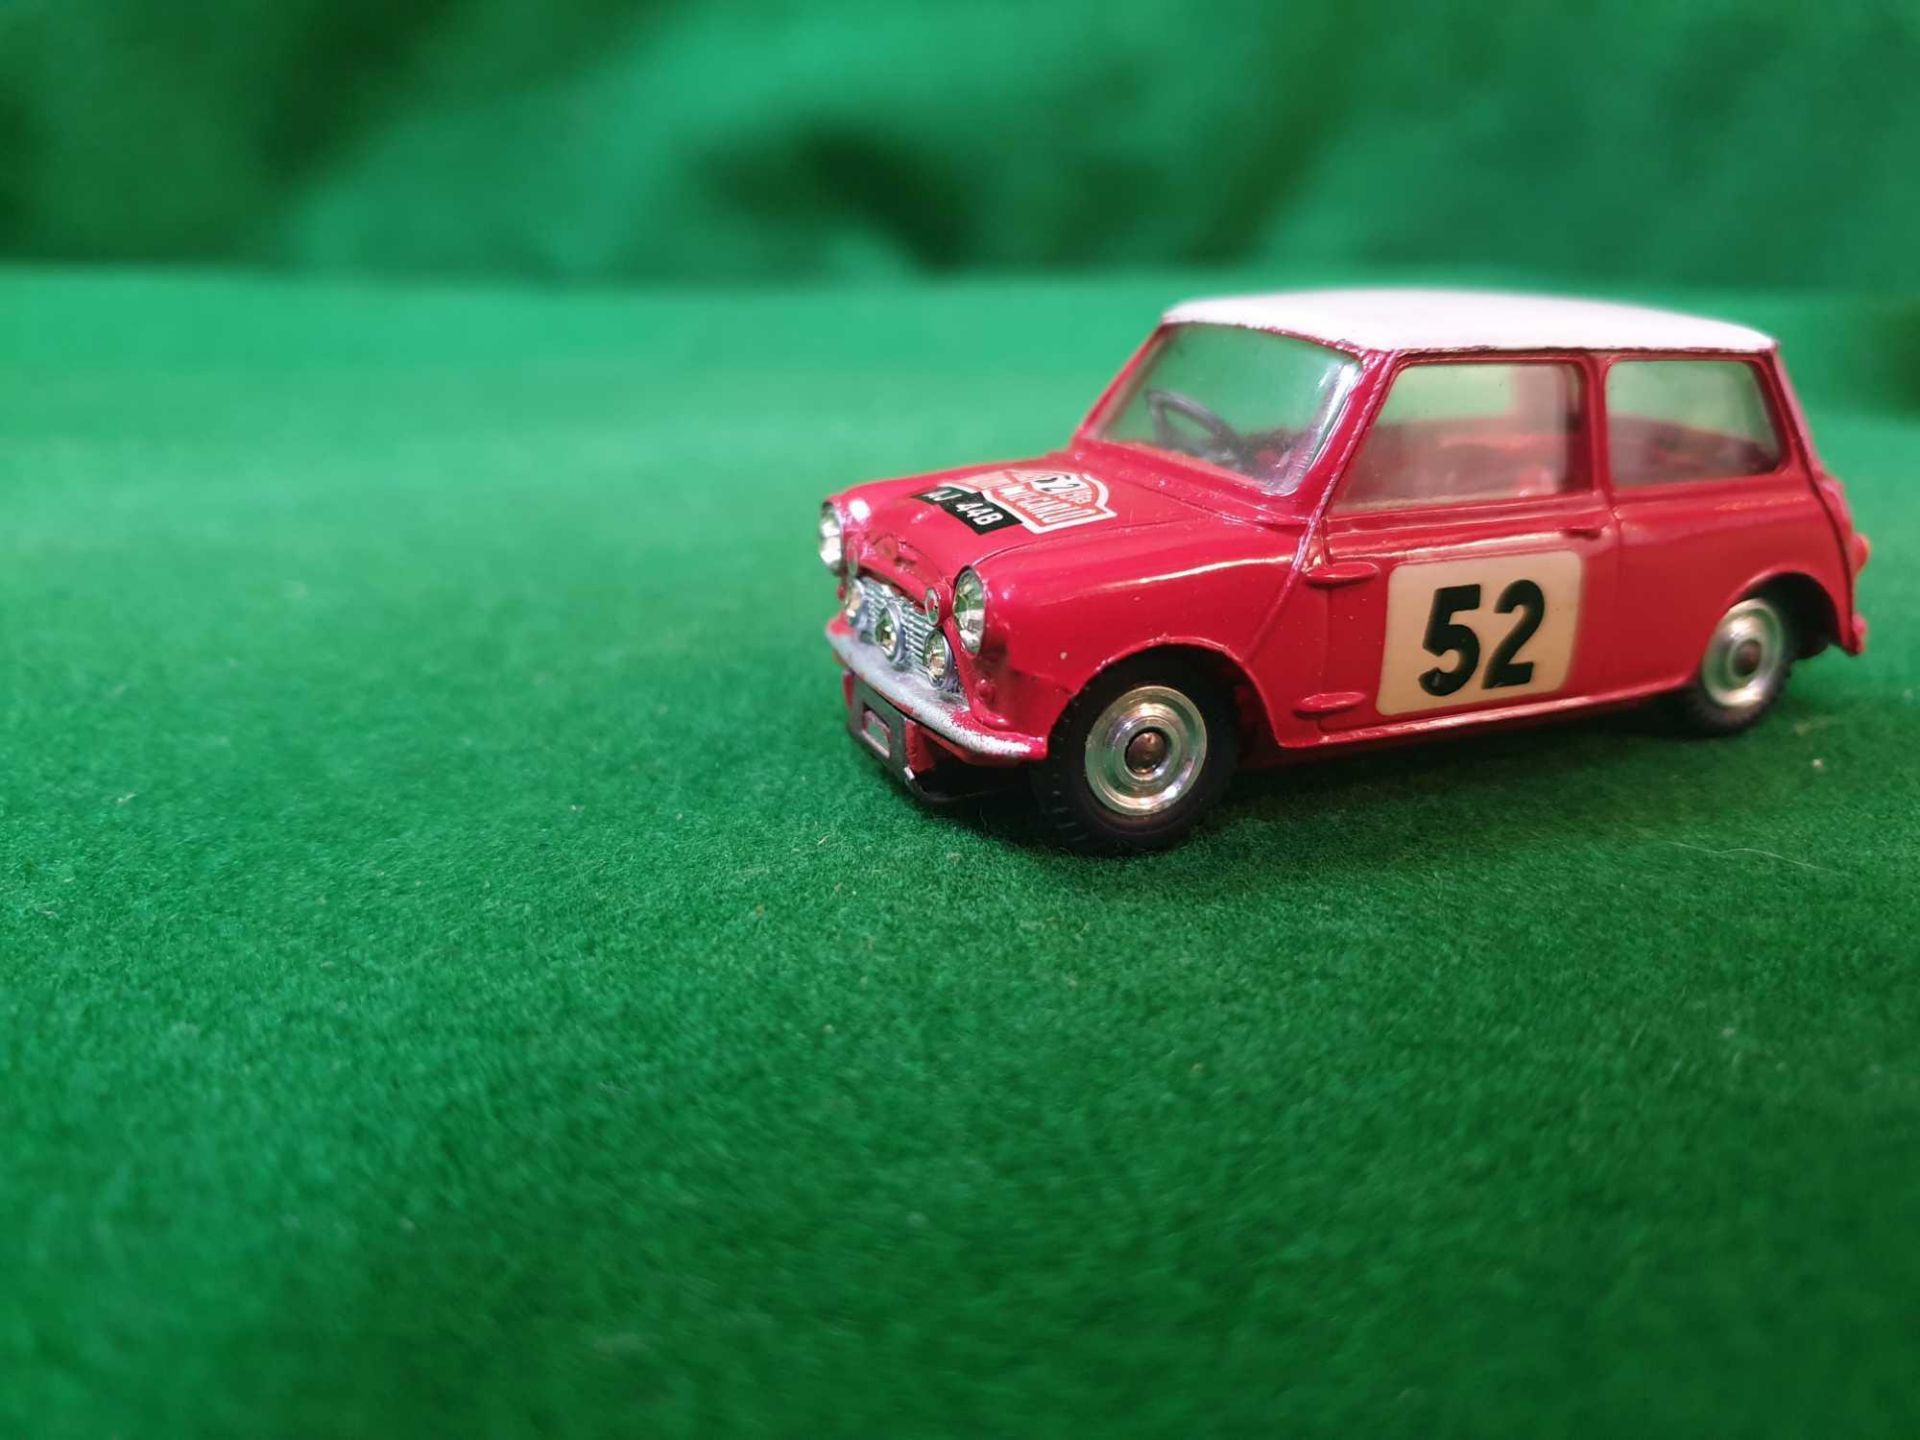 Corgi #321 BMC Monte Carlo Mini Cooper Red Body White Roof No 52 Decal Unboxed In Good Overall - Image 3 of 3